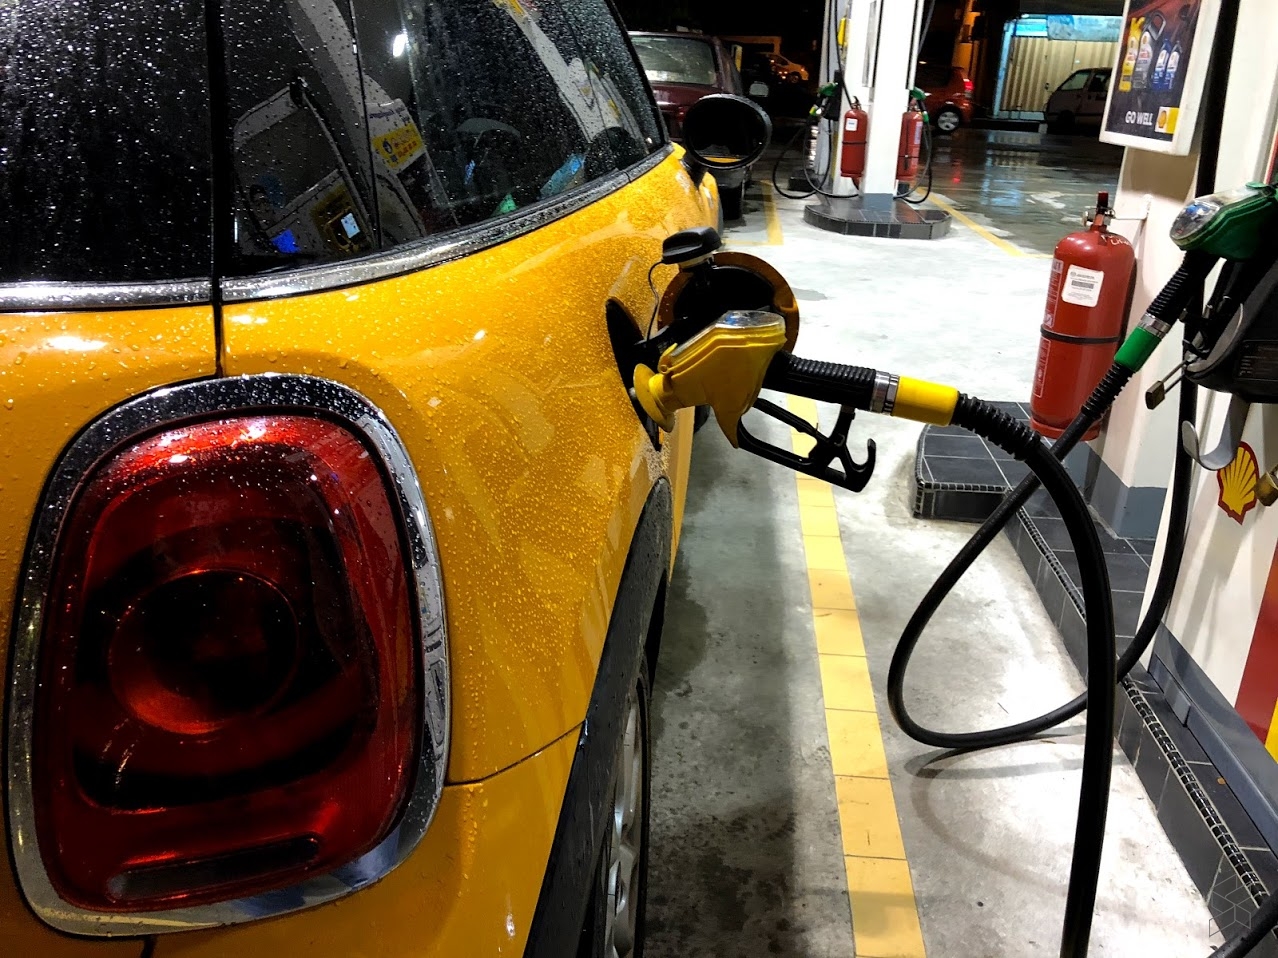 Ron95 Fuel Price Drops By 19 Sen To Rm1 89 Litre In Malaysia